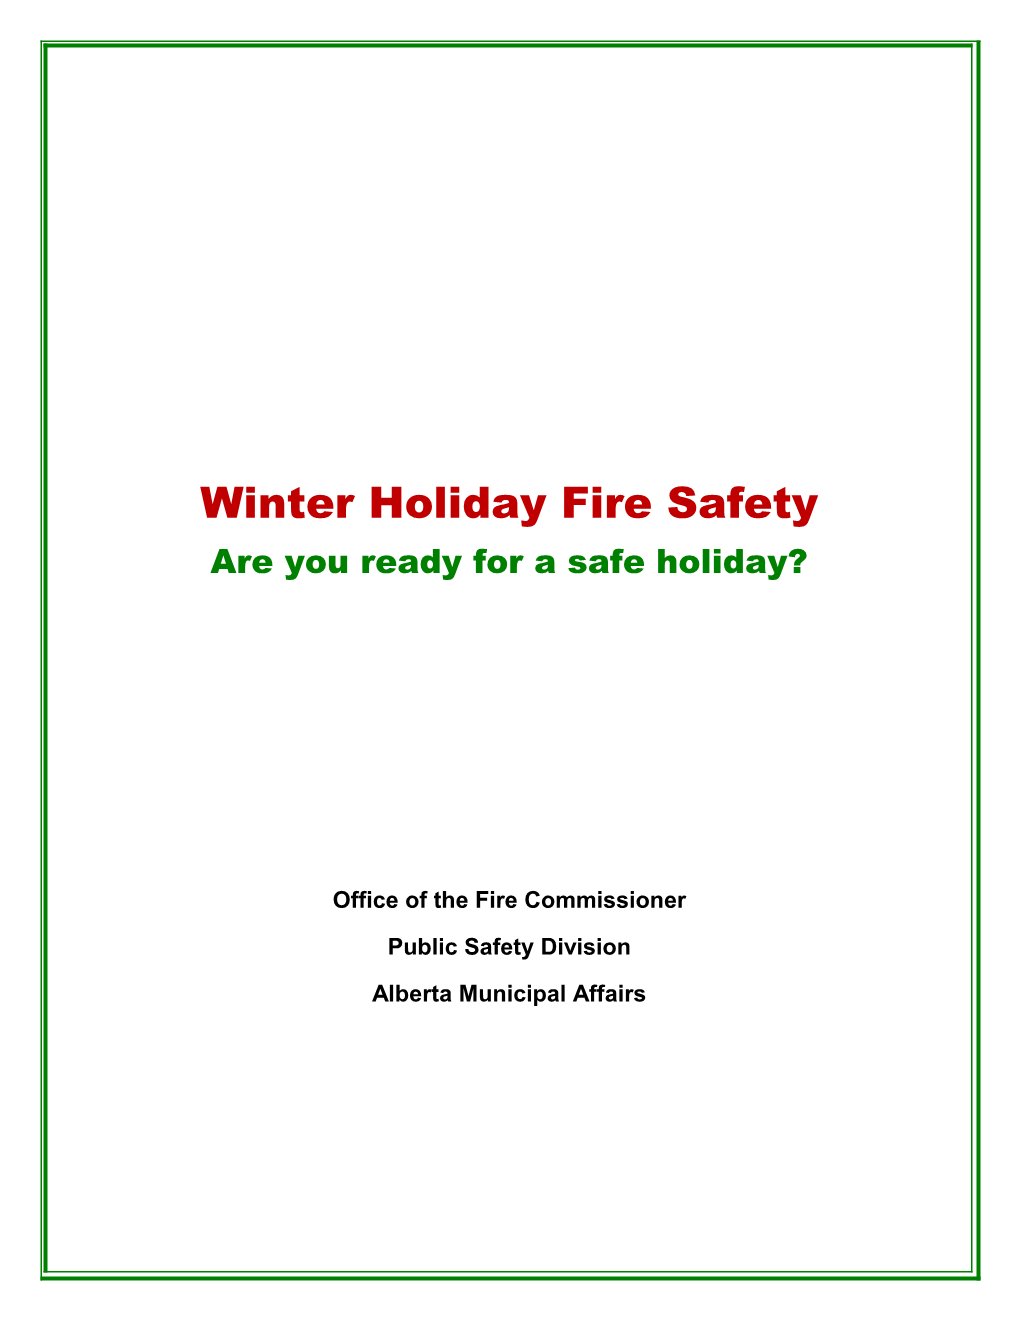 With the Holiday Season Coming Fast, the Home Safety Council Wants Families to Stay Safe